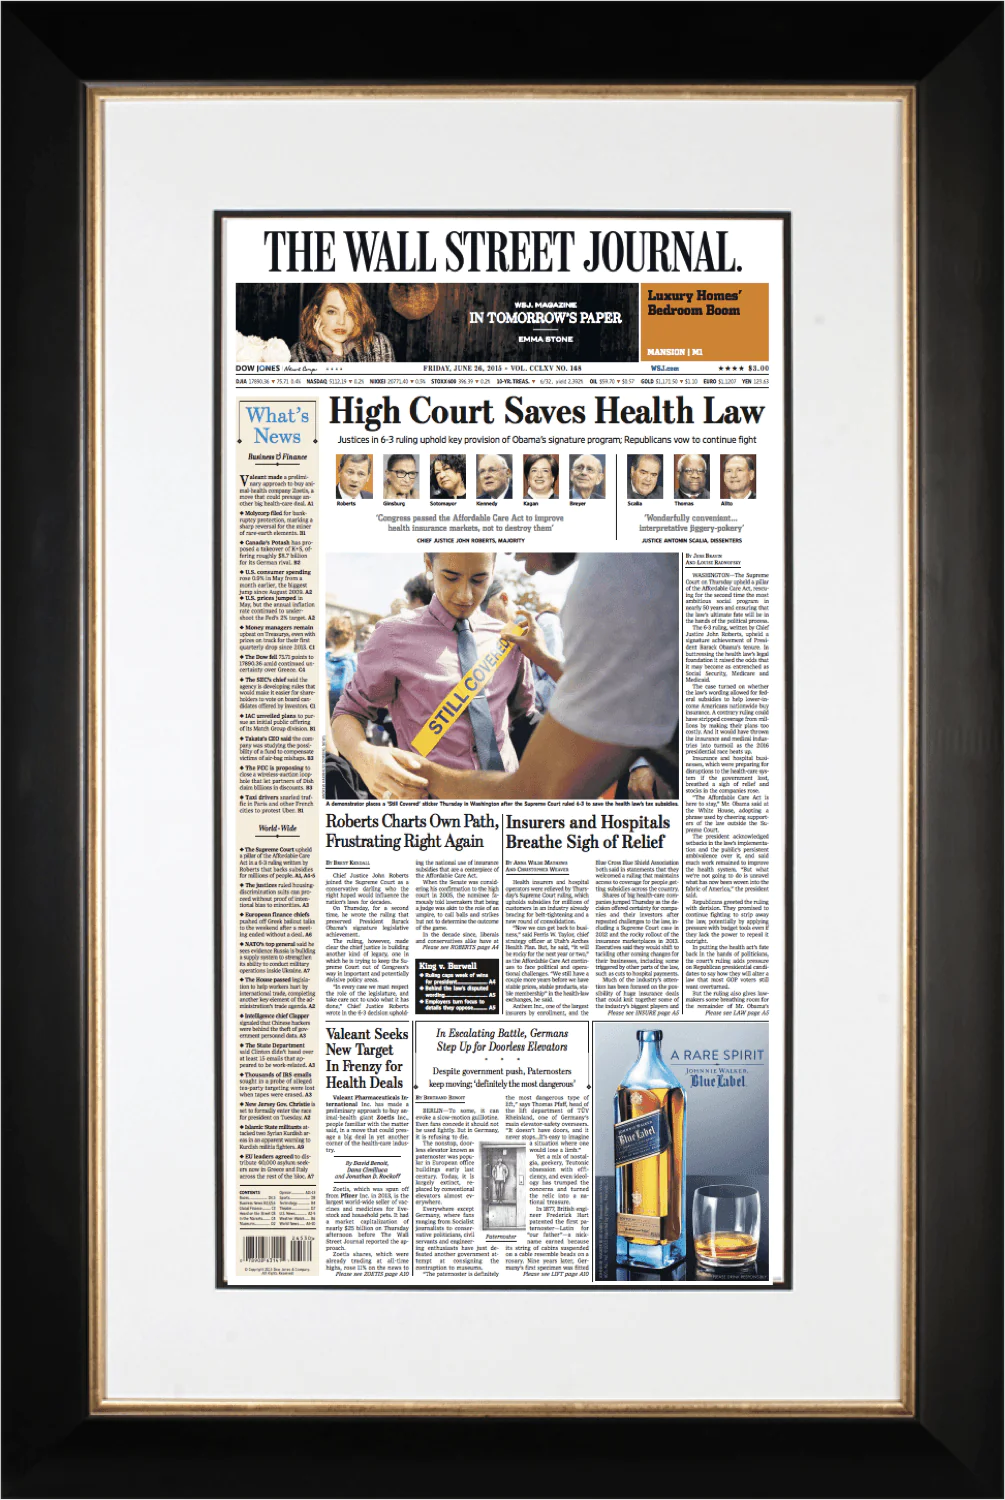 Supreme Court Upholds Health Law | The Wall Street Journal, Framed Reprint, June 26, 2015